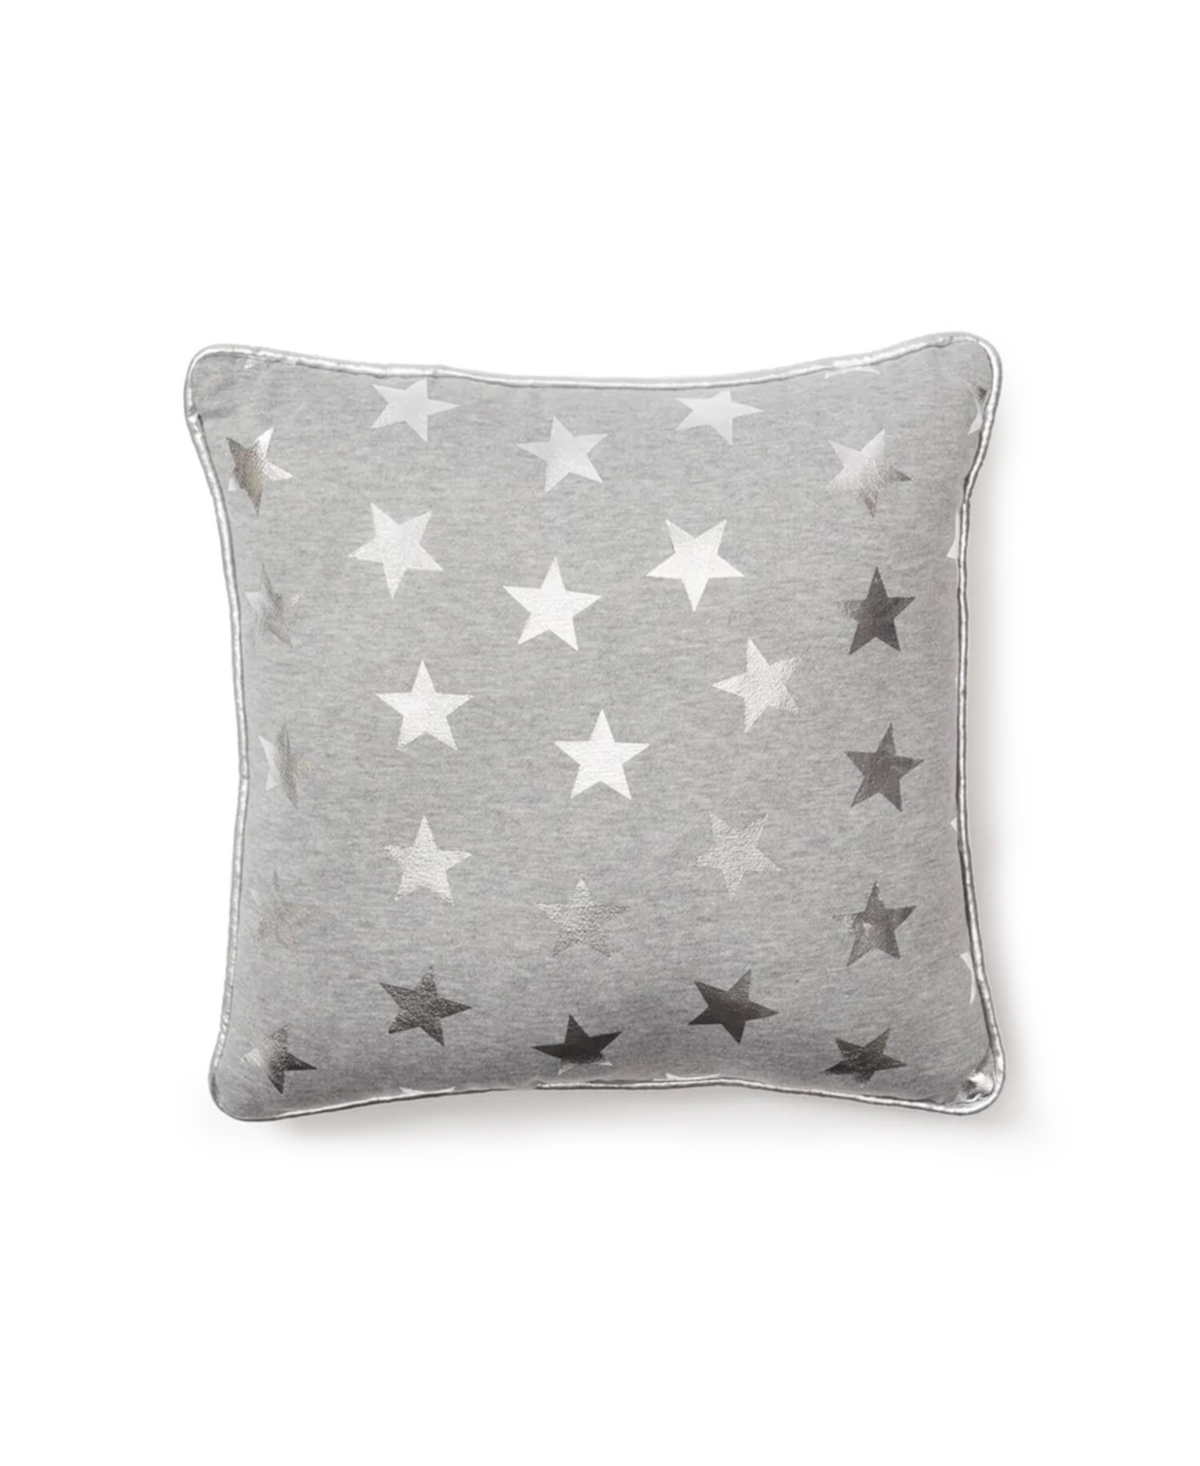 Dormify Sweatshirt Star Square Pillow, 16" X 16", Ultra-cute Styles To Personalize Your Room In Silver